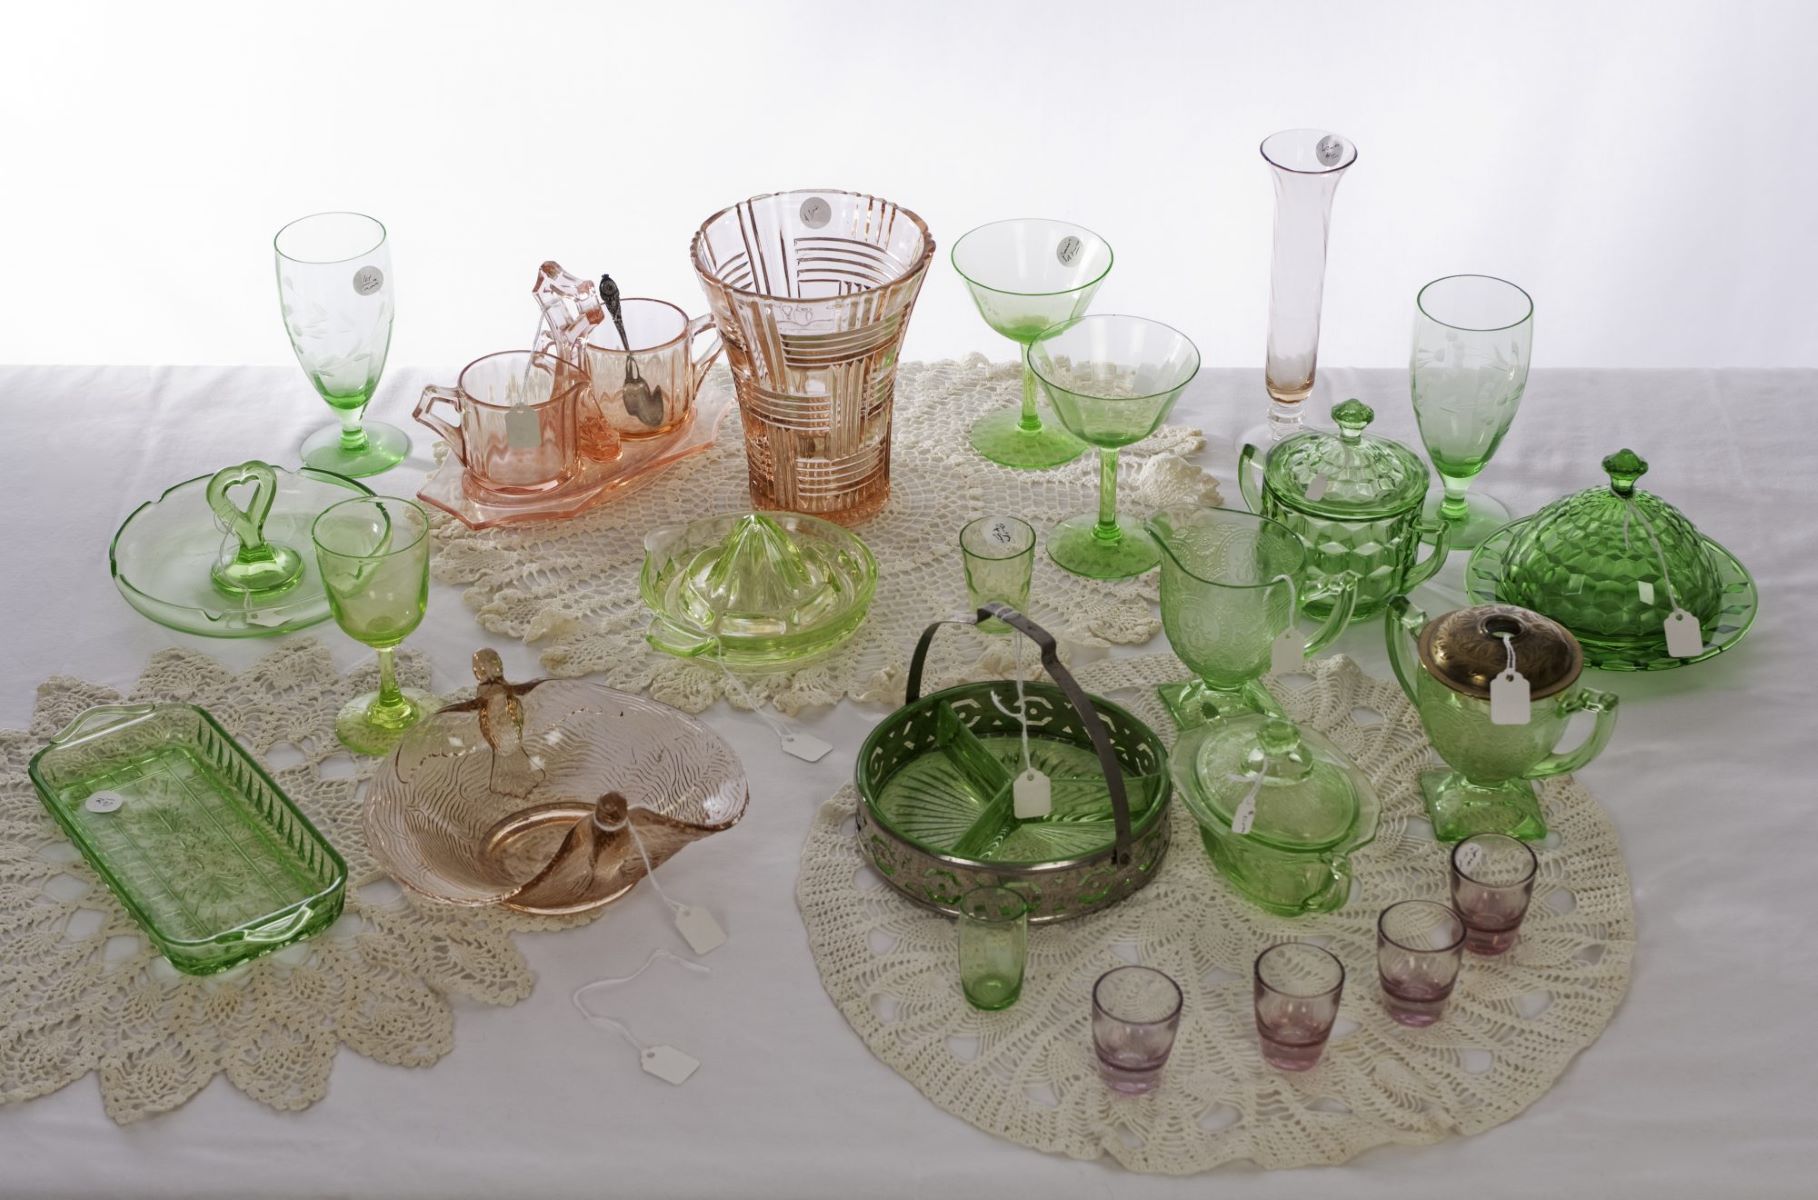 Why Is It Called Depression Glass